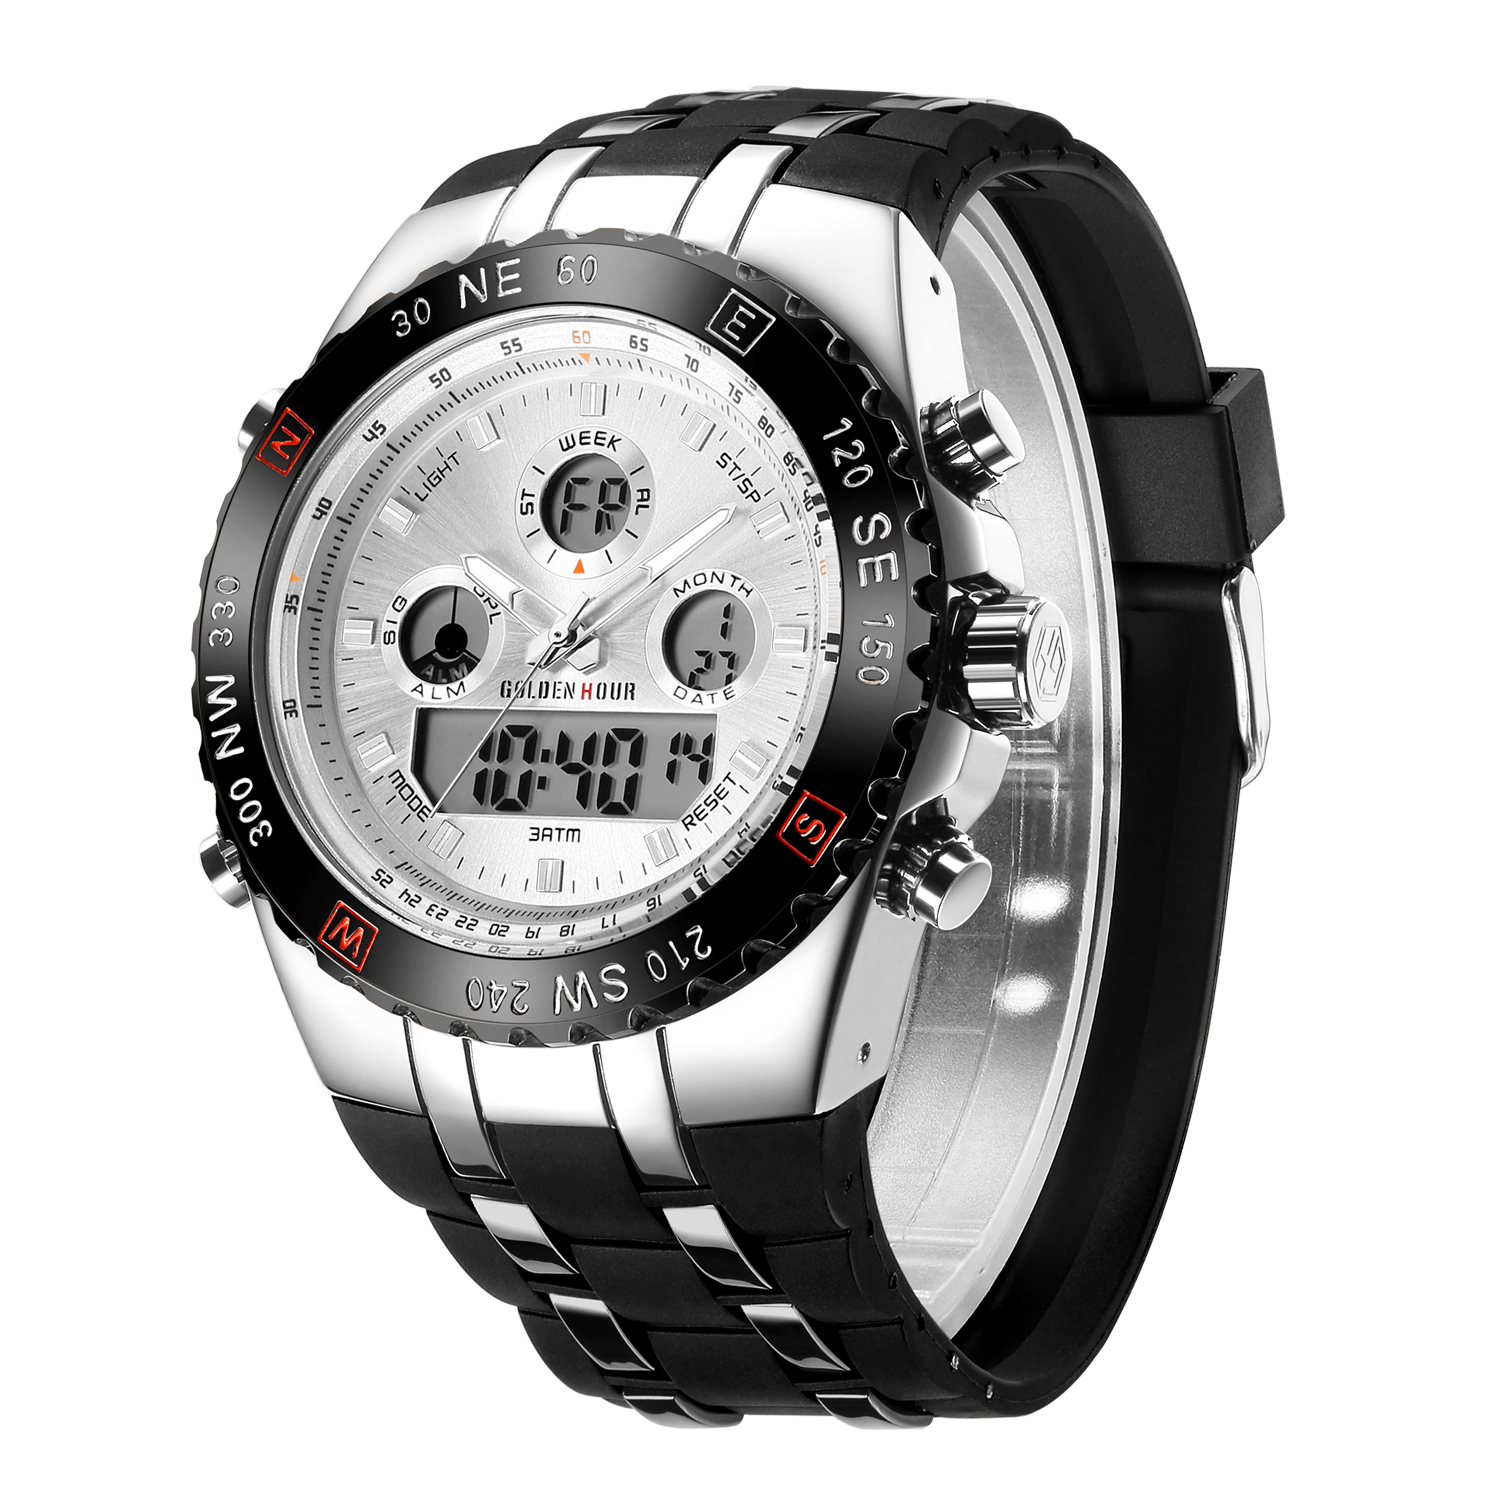 GOLDEN HOUR GH-124-S-W Mens Big Face Digital Analog Watches